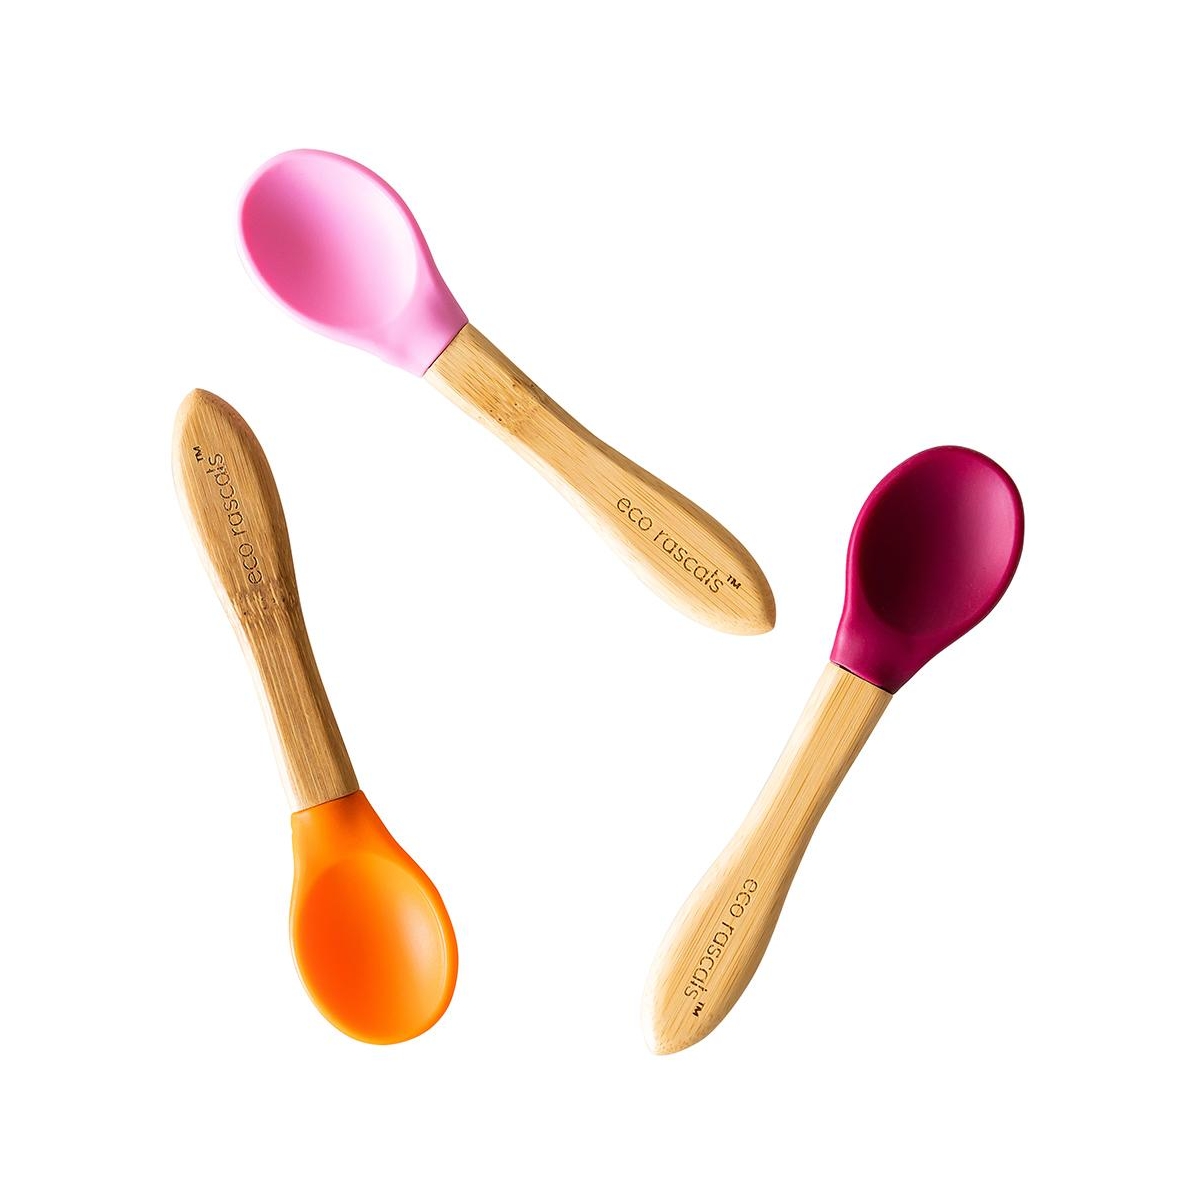 eco rascals Pack of 3 Mixed Colour Spoons